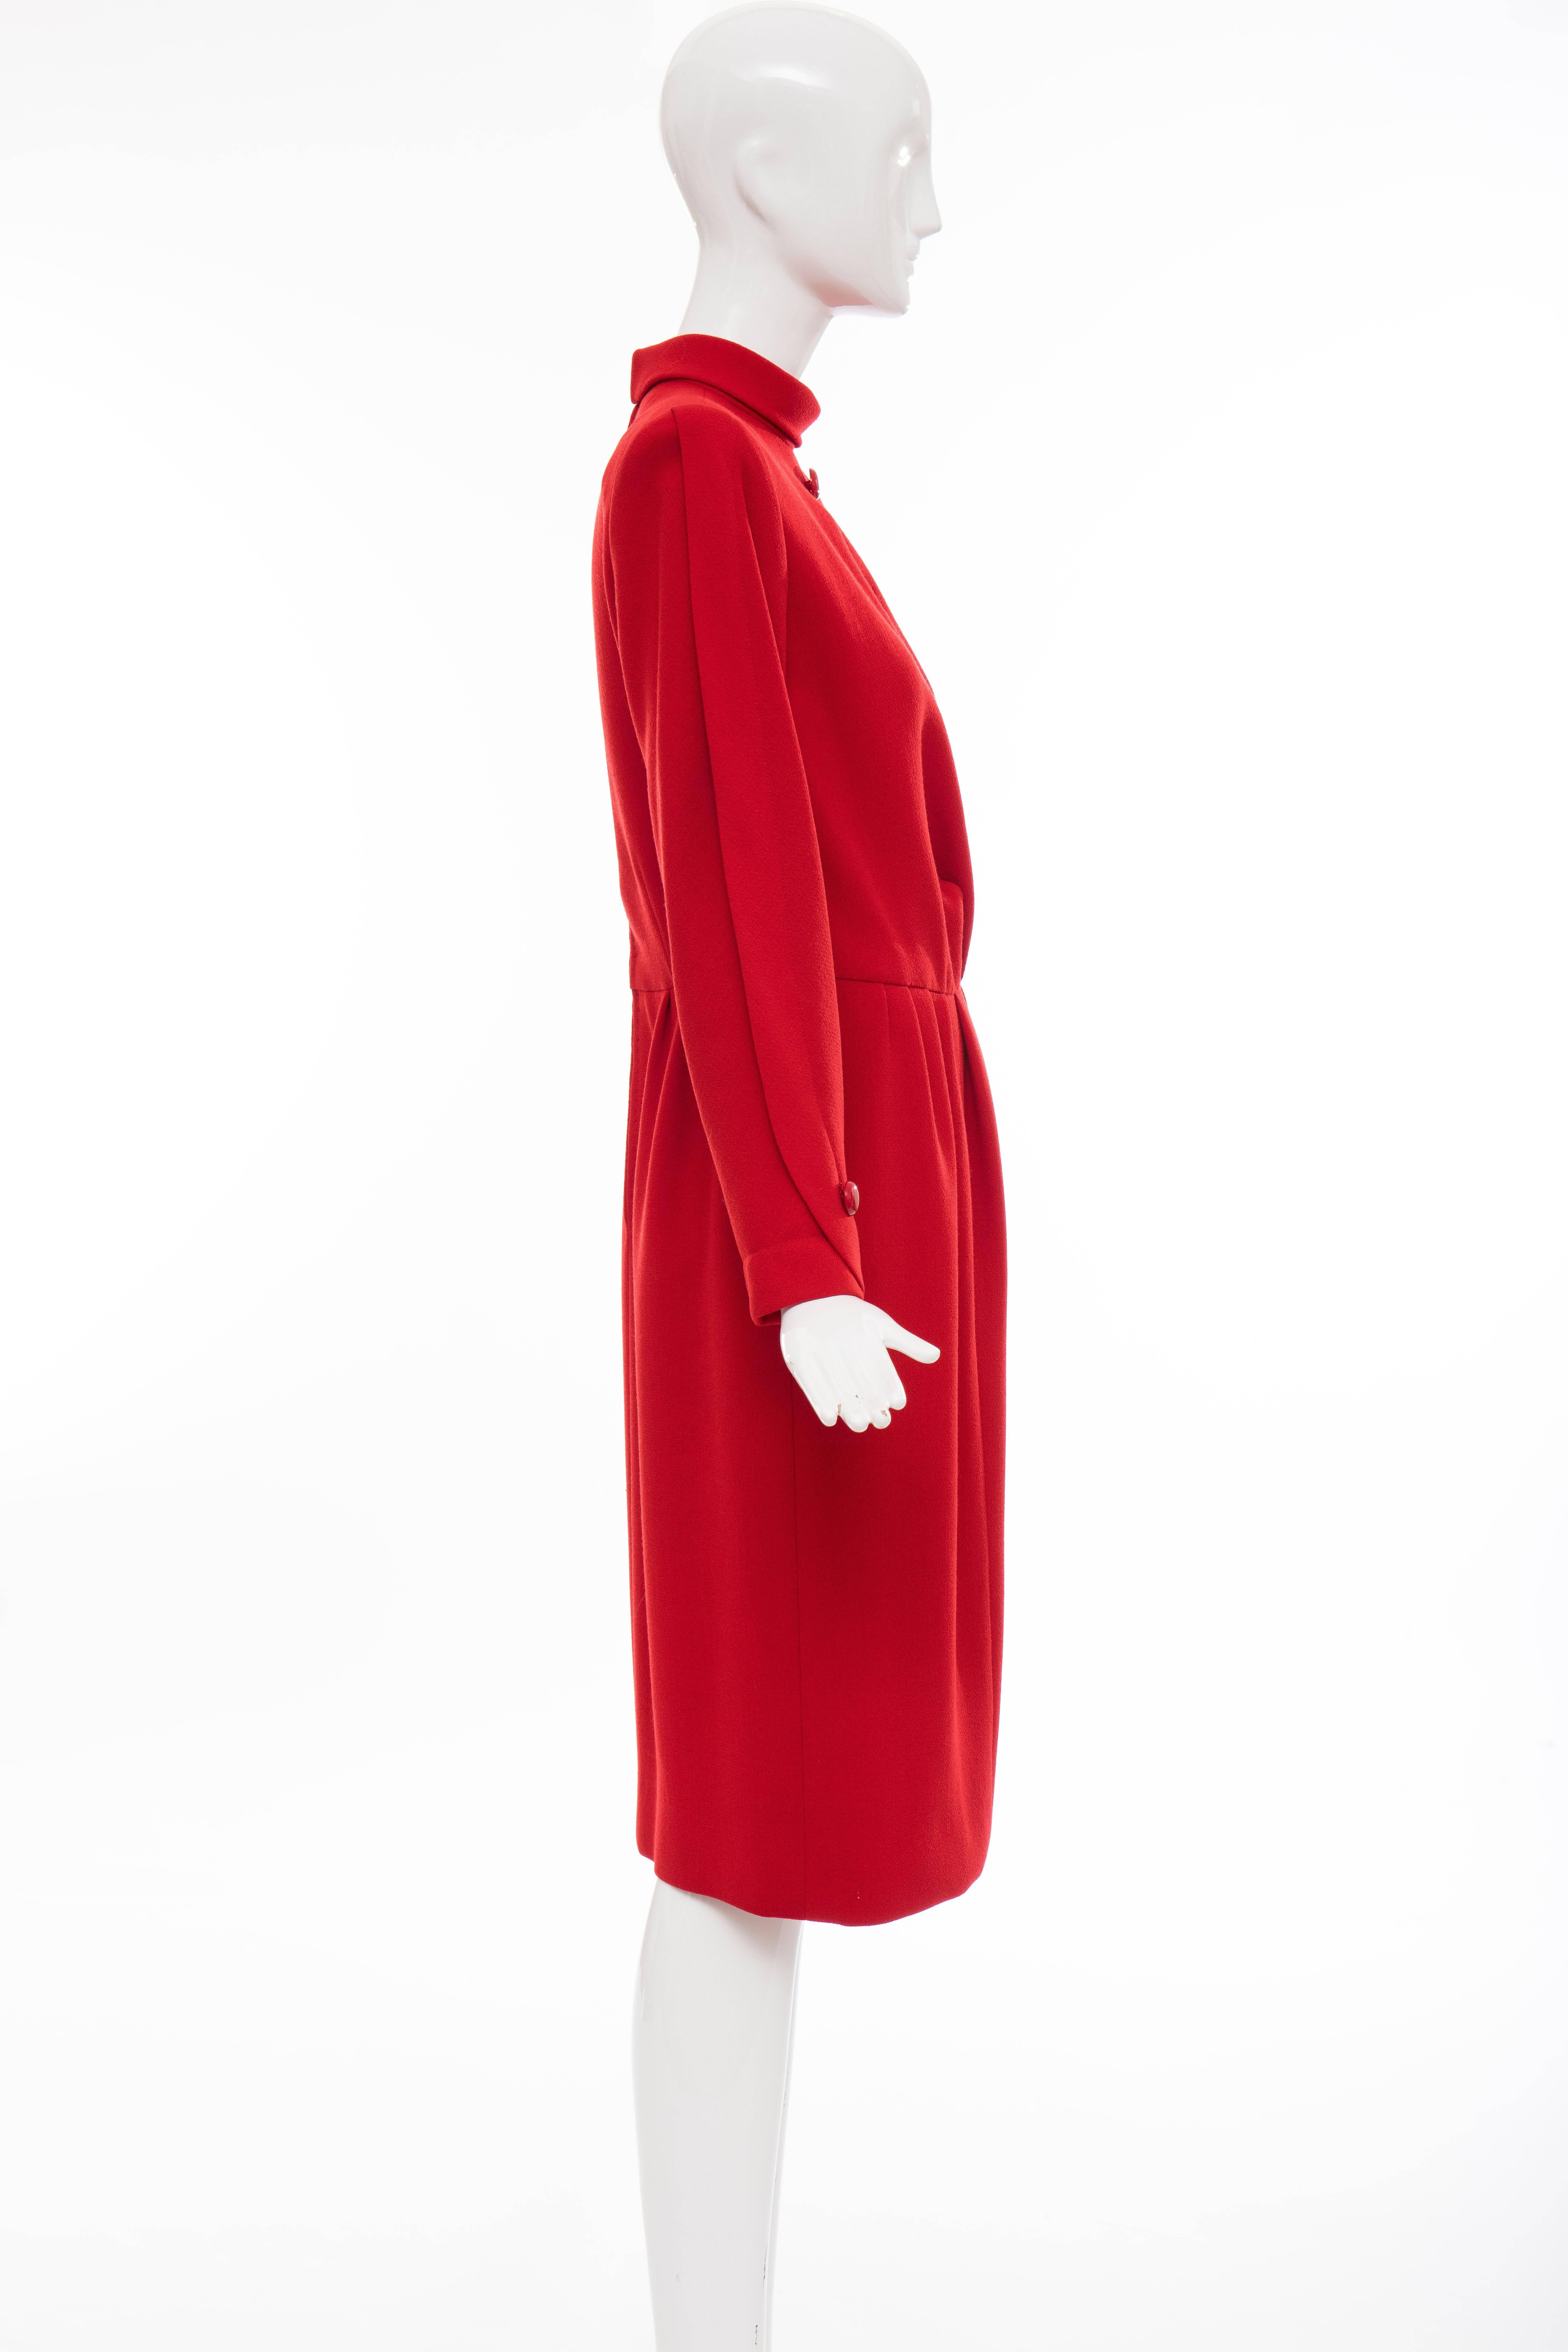 Nina Ricci Haute Couture Red Wool Crepe Dress, Circa 1980's For Sale 2